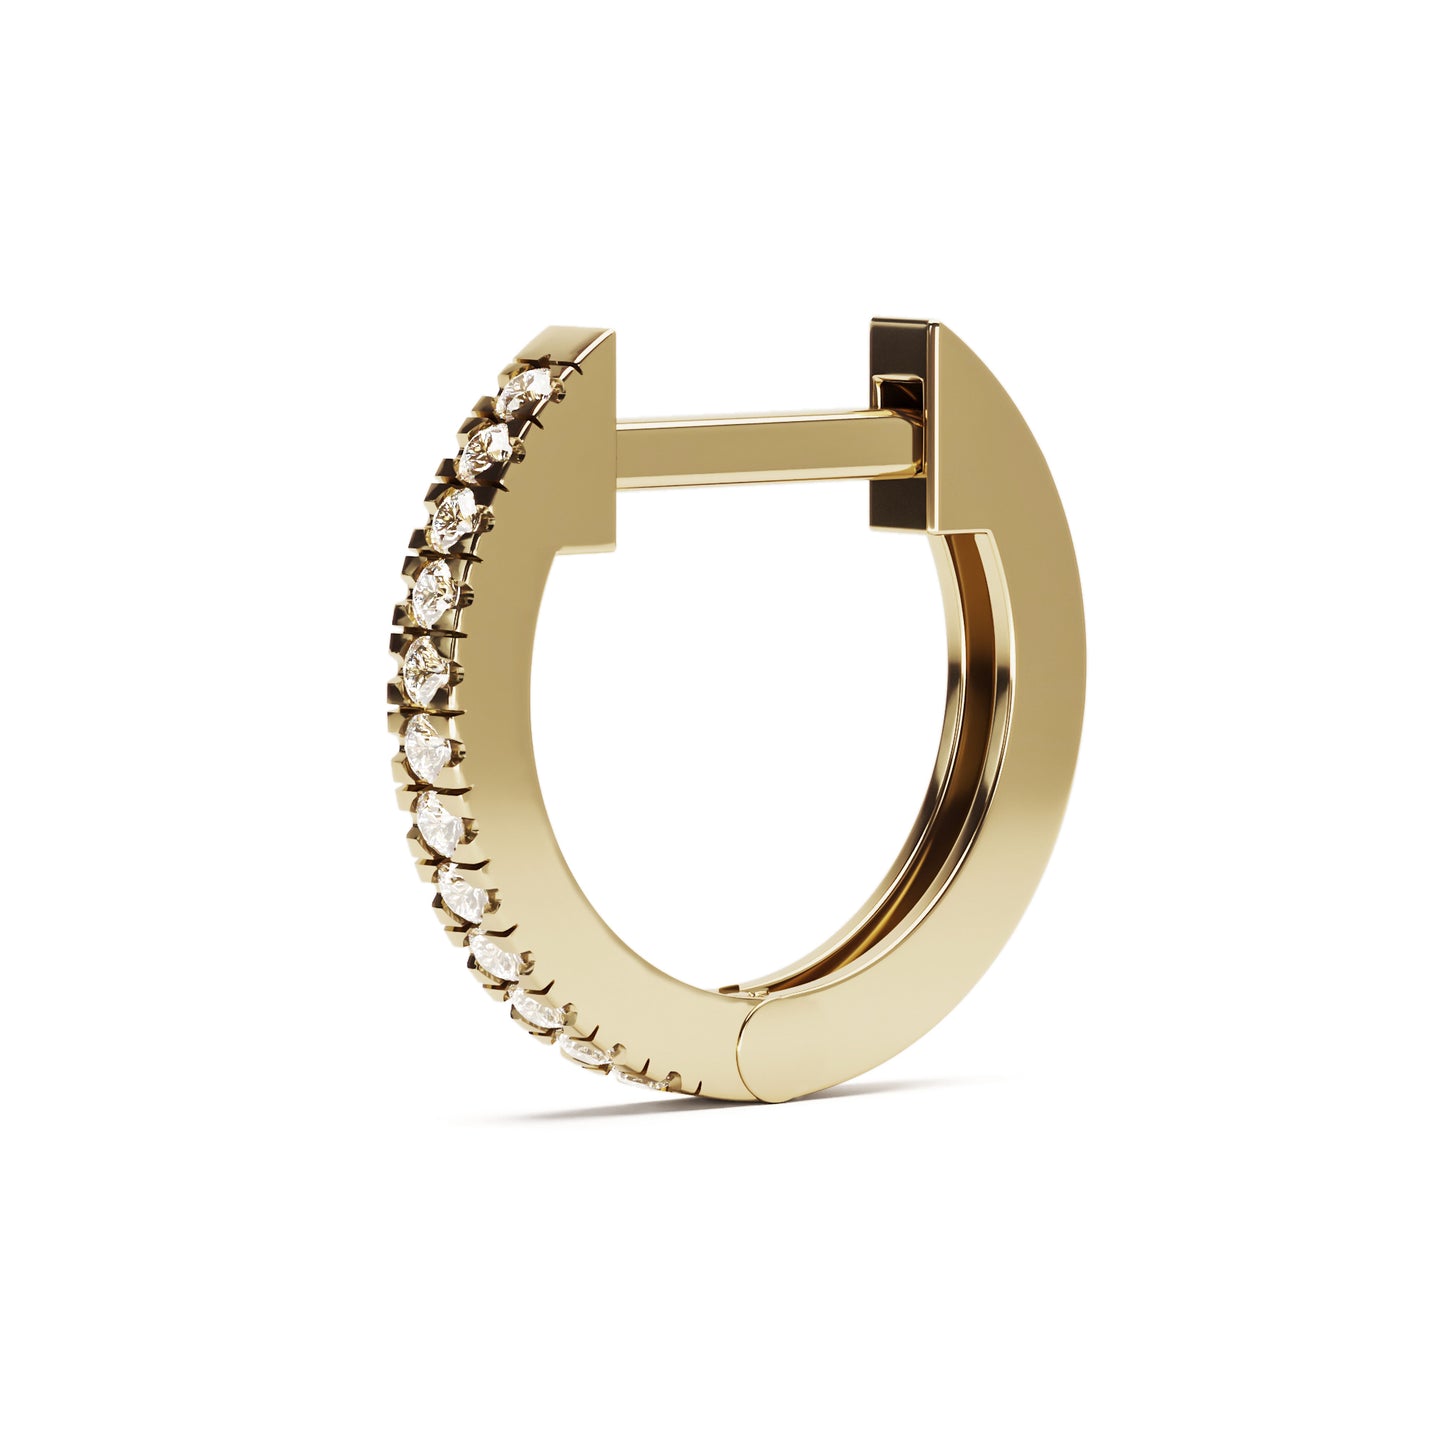 Solid Gold Pave Set Diamond Clicker Hoop